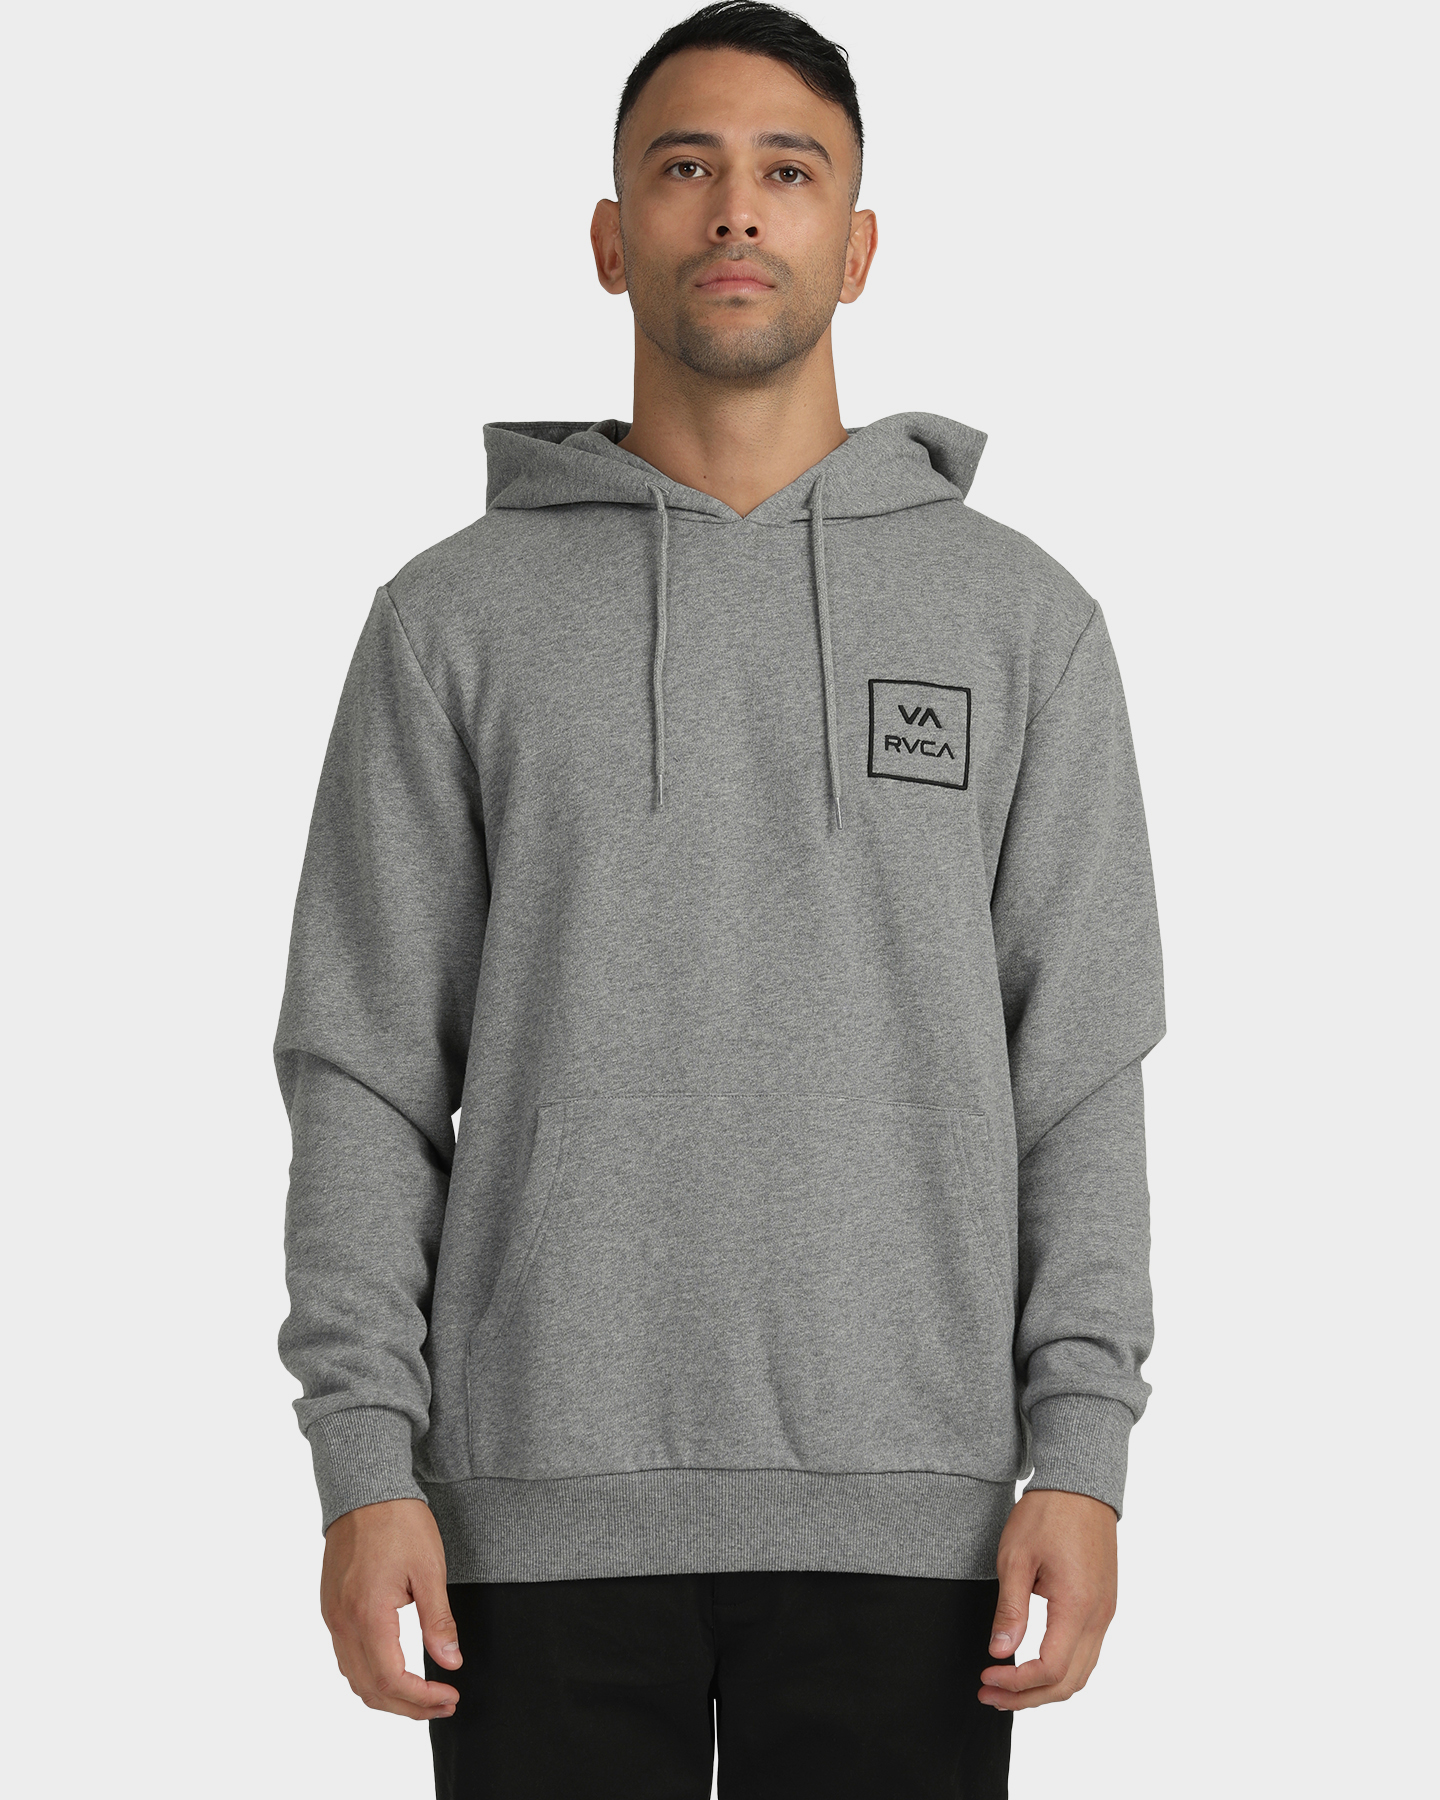 Buy Rvca All The Ways Hoodie & Pay Later | humm